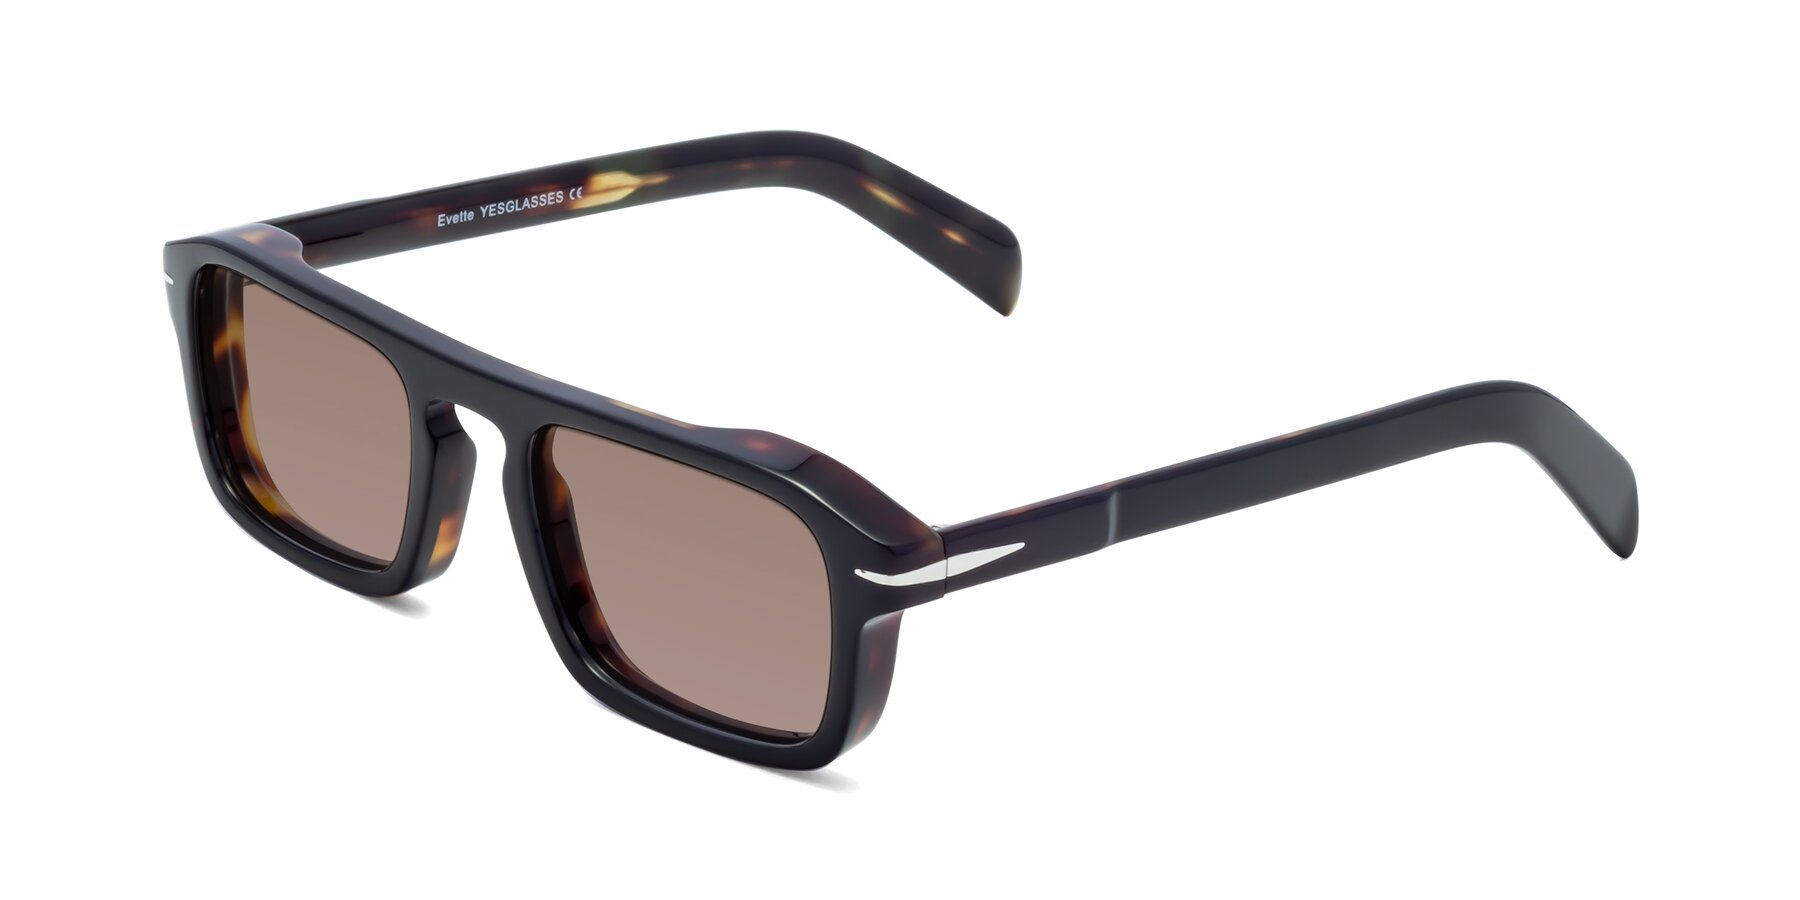 Angle of Evette in Black-Tortoise with Medium Brown Tinted Lenses